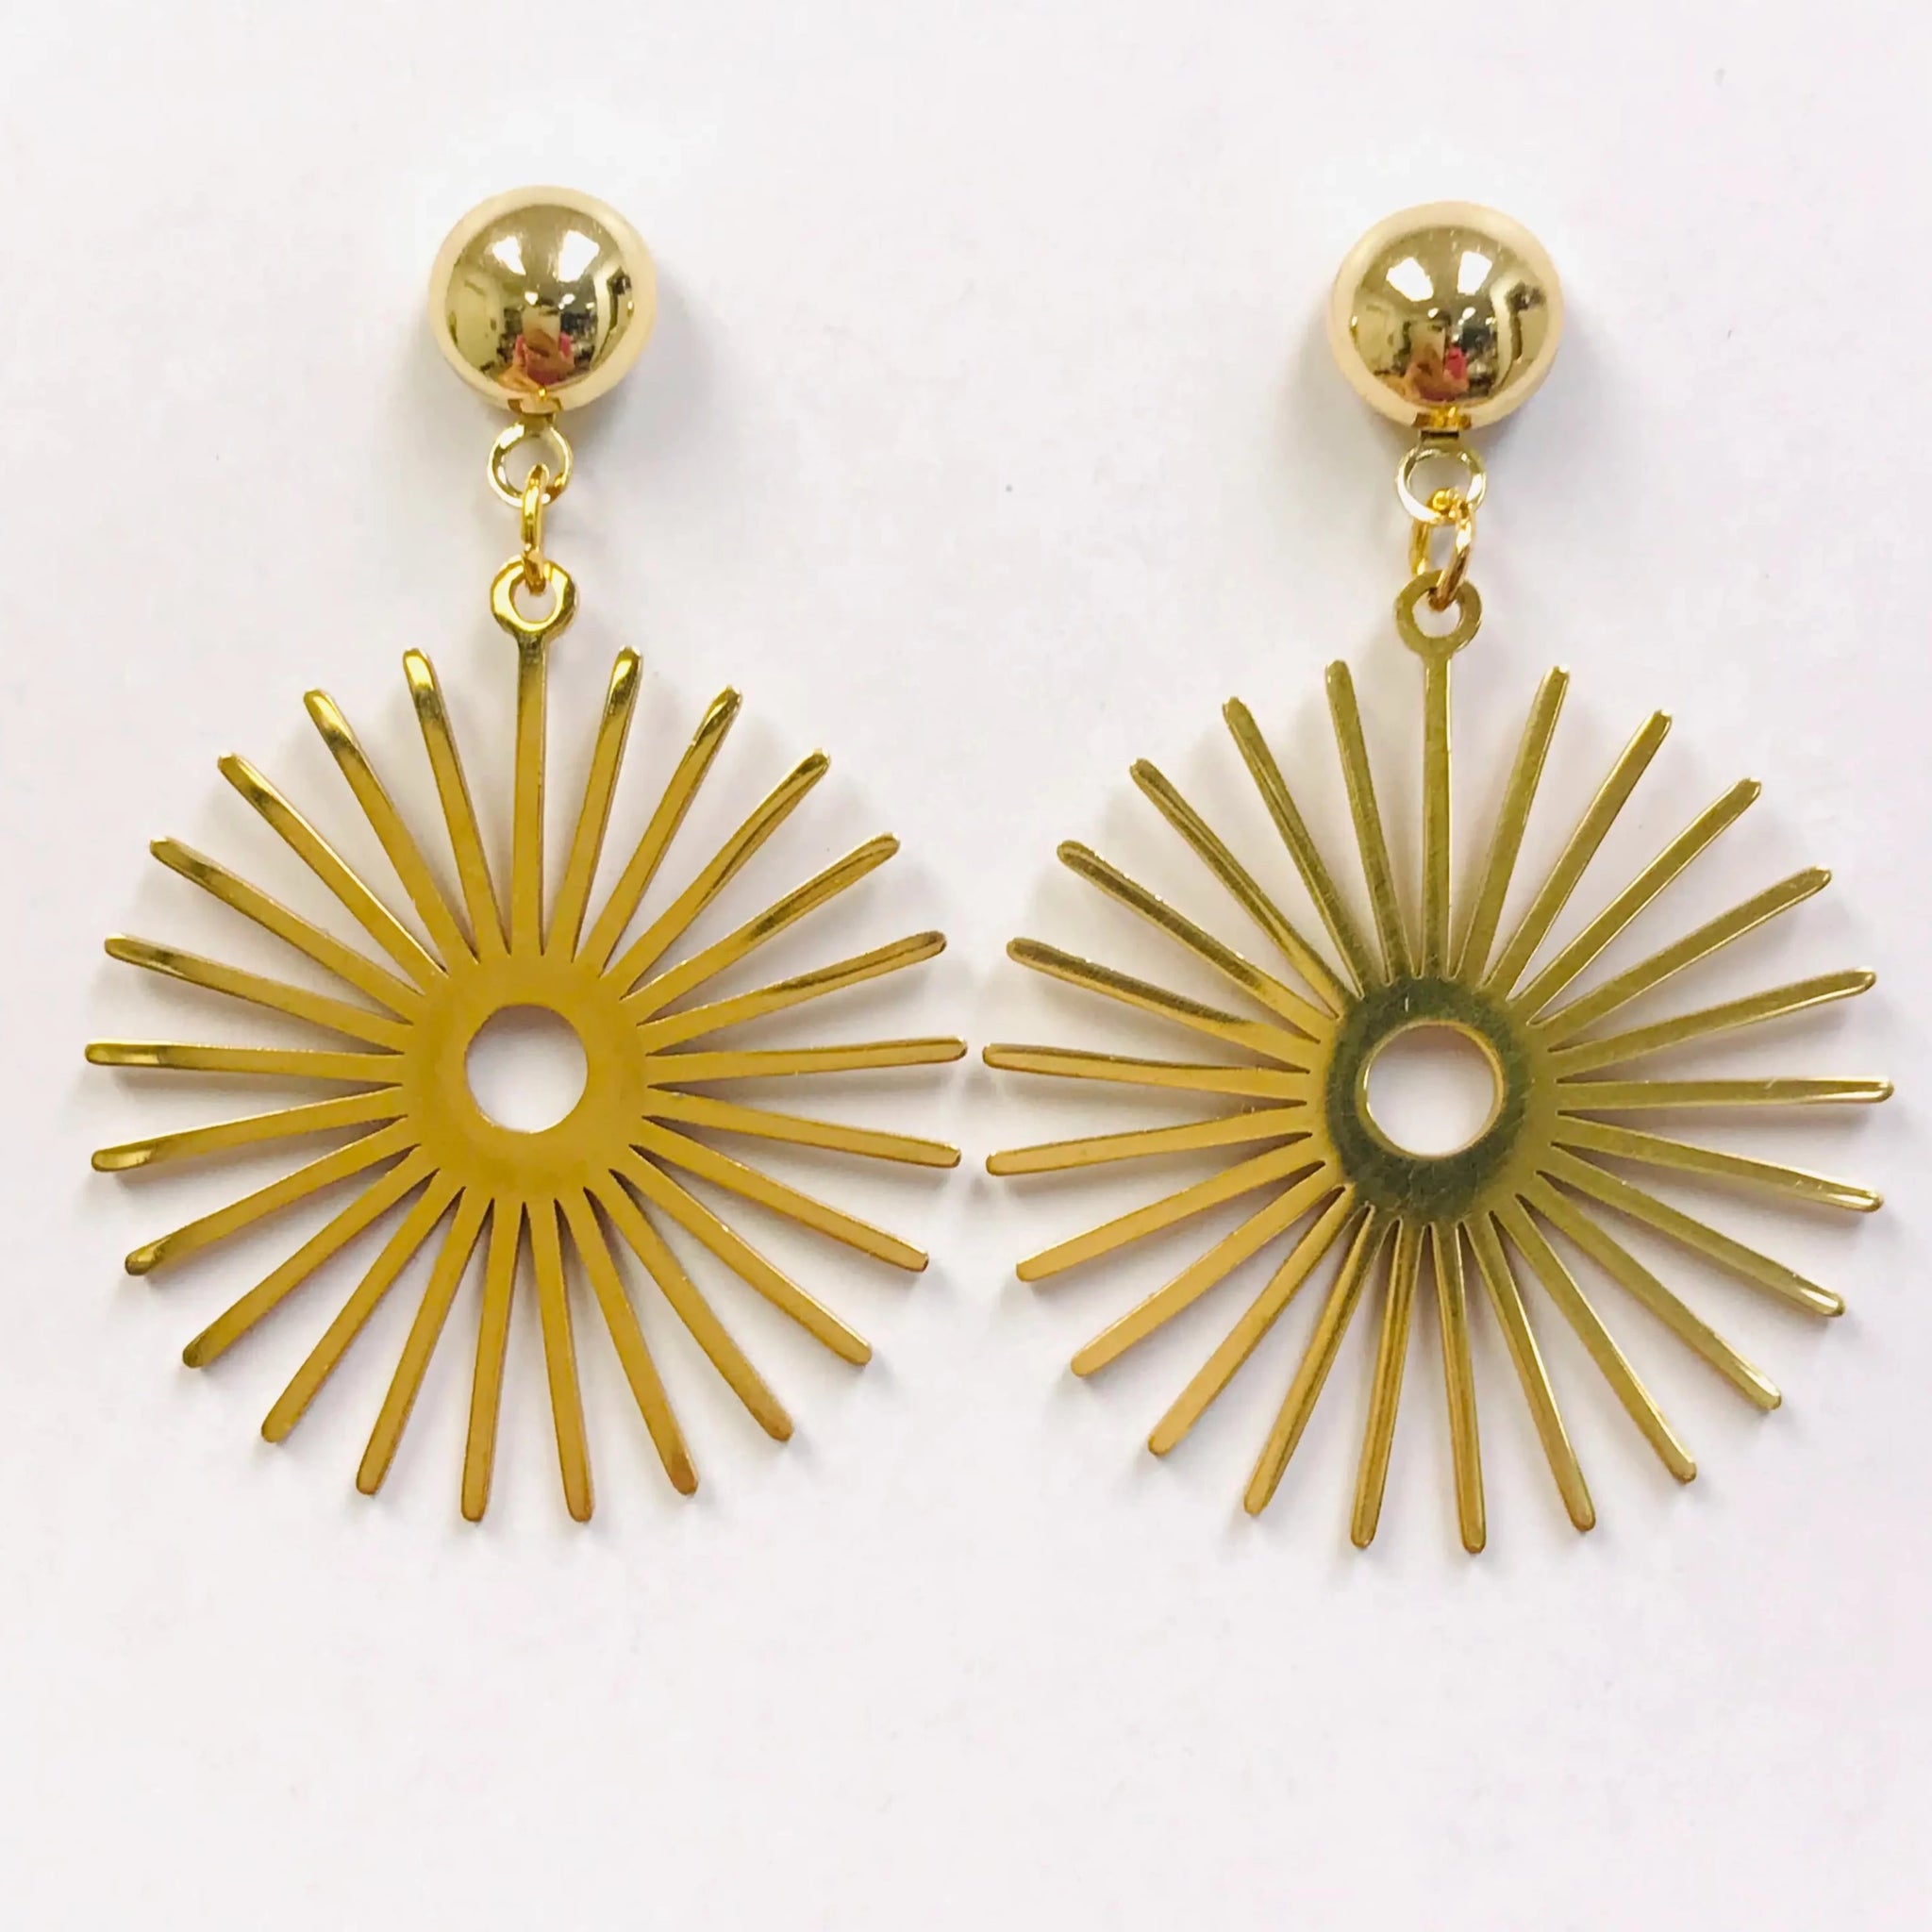 A pair of gold metal drop earrings with a large starburst attached to a post backing